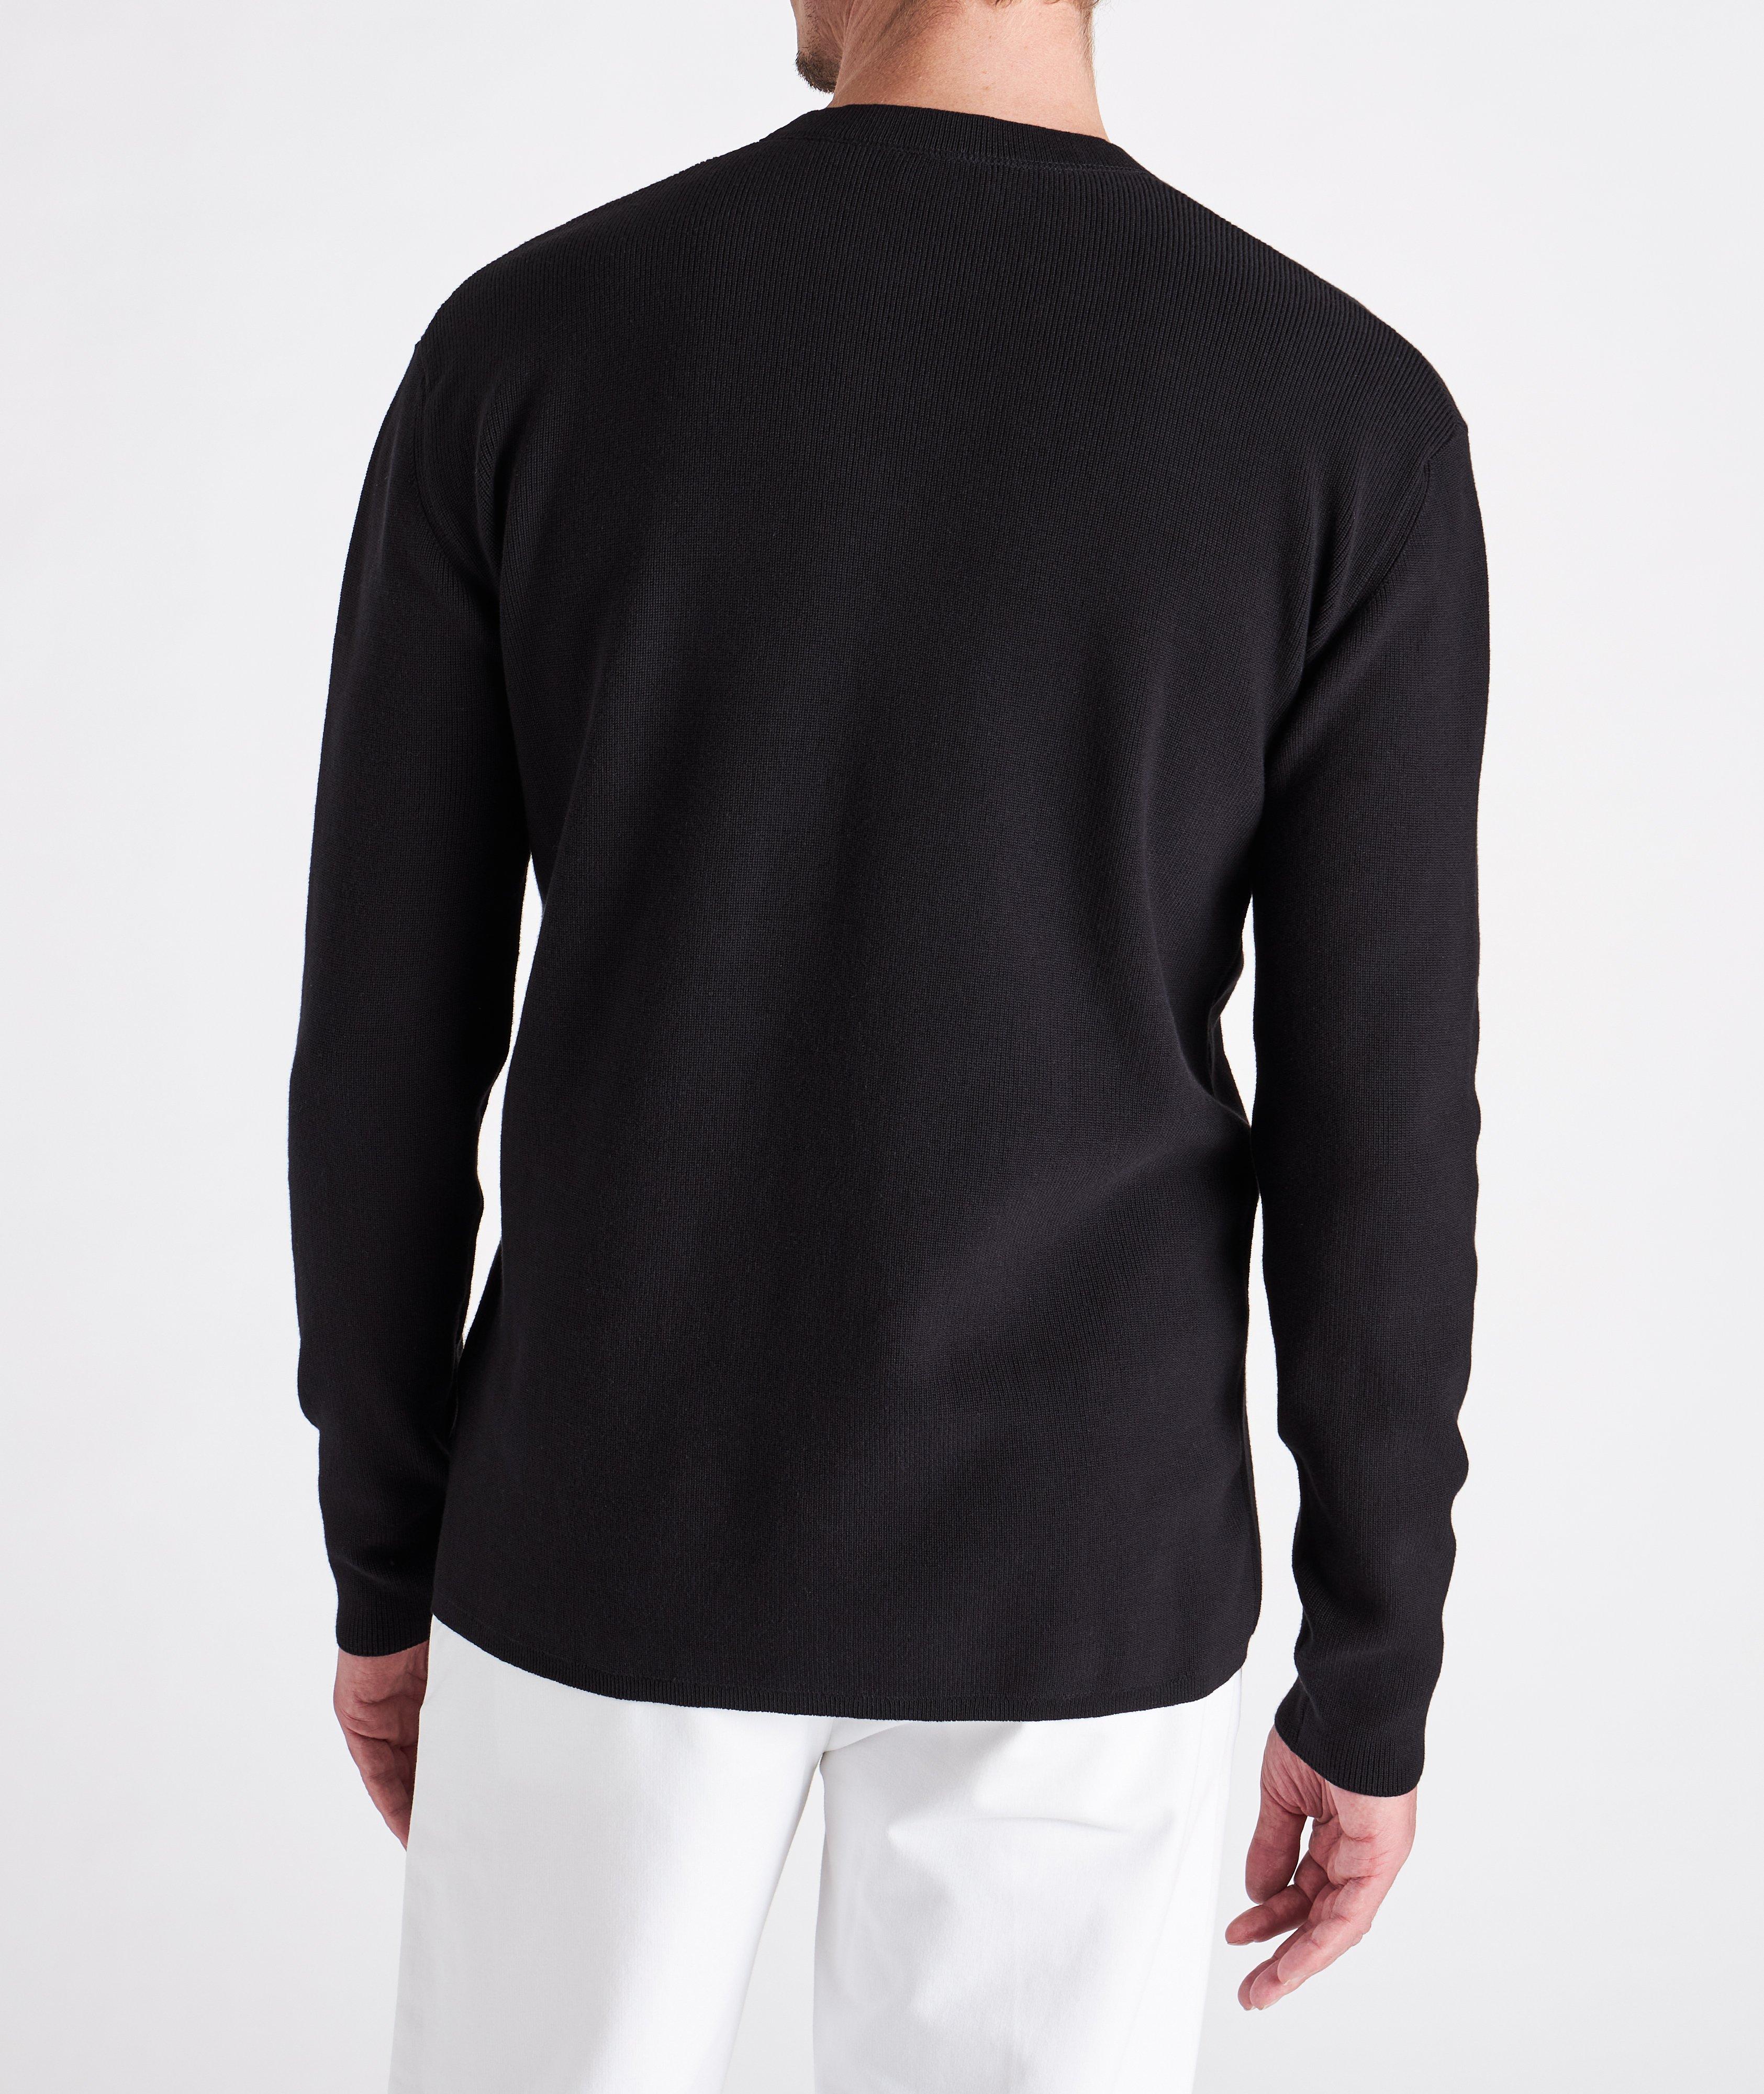 Moncler Girocollo Tricot Cotton Sweater | Sweaters & Knits | Harry Rosen